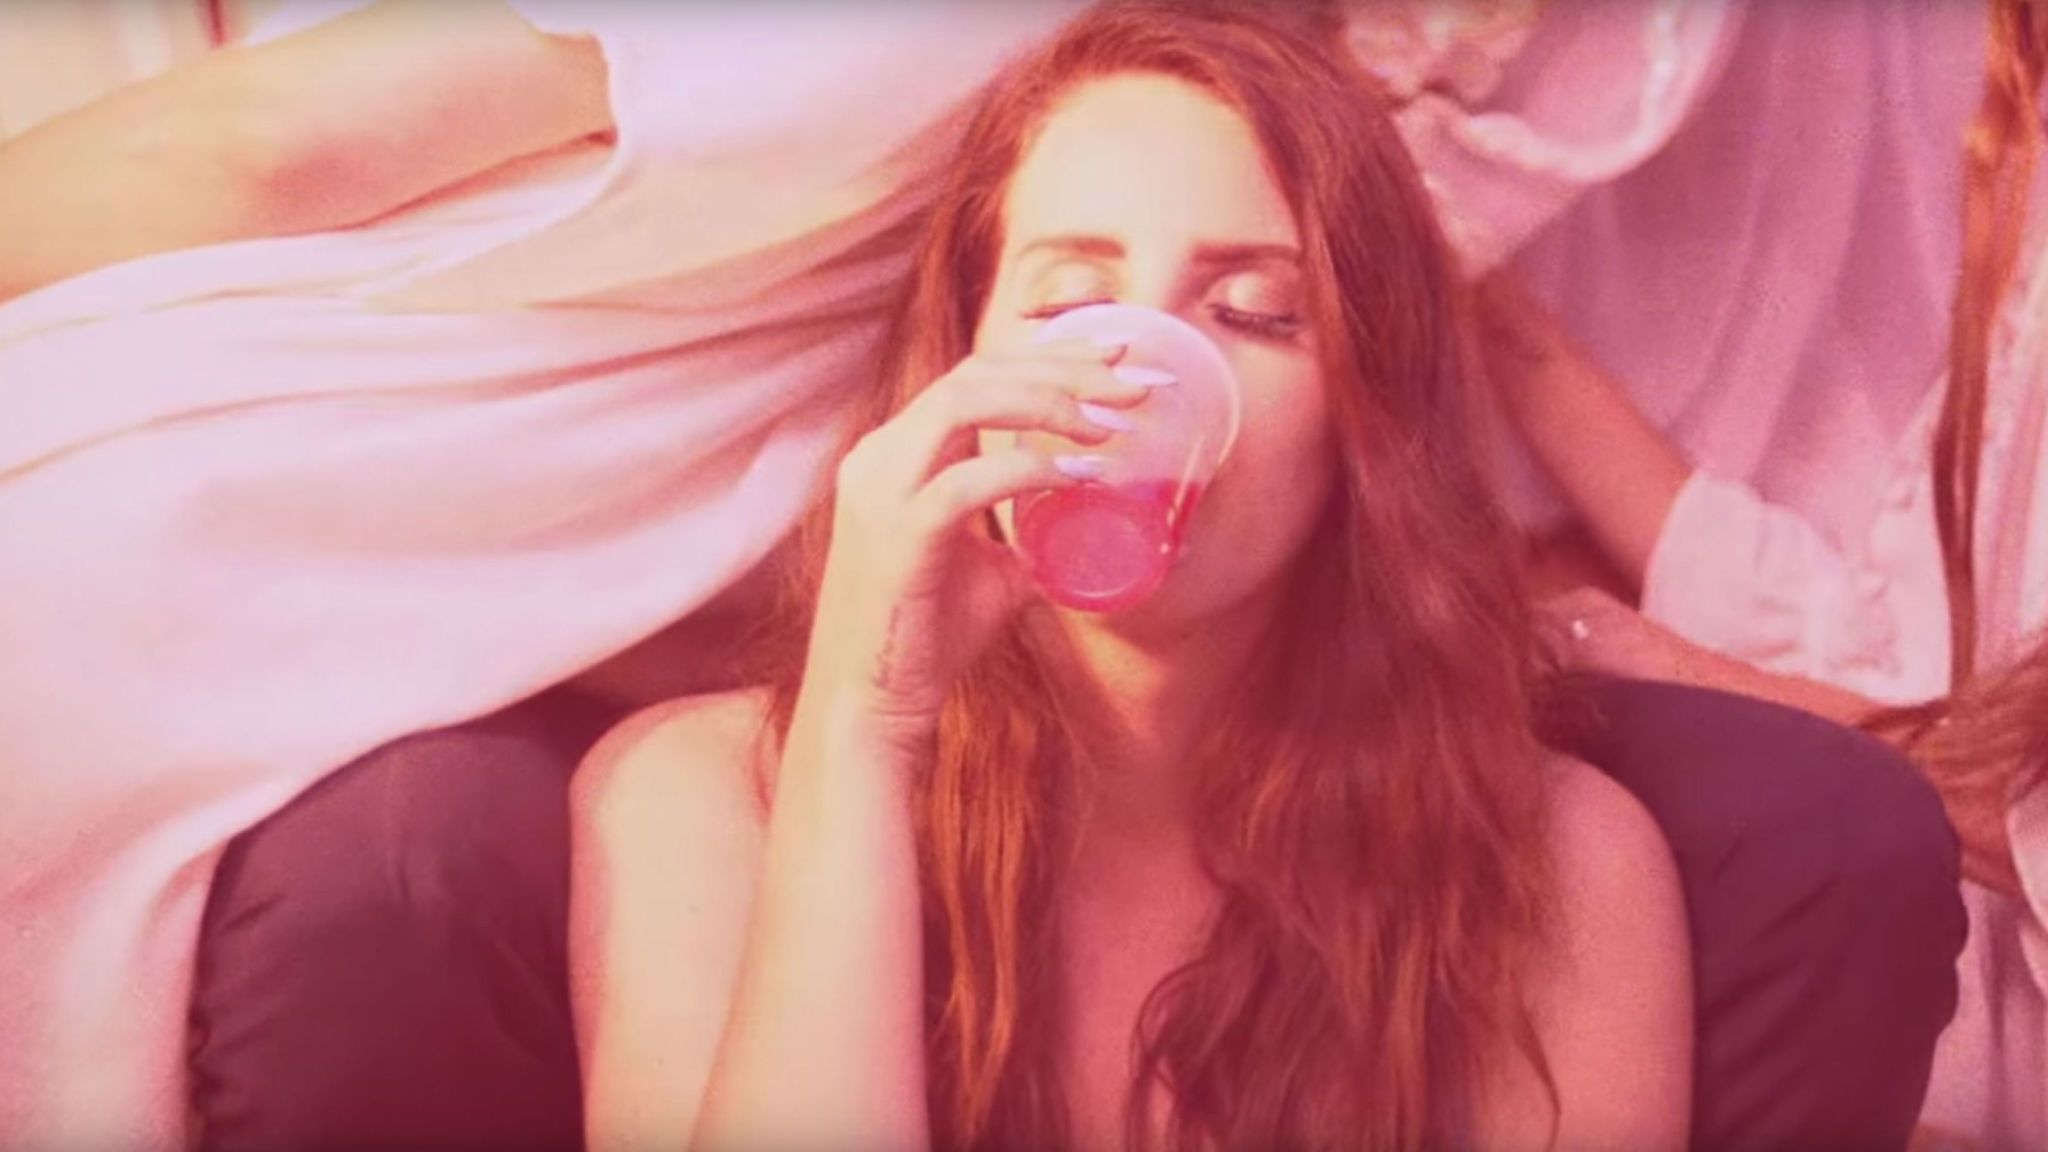 A woman drinking from the bottle - Lana Del Rey